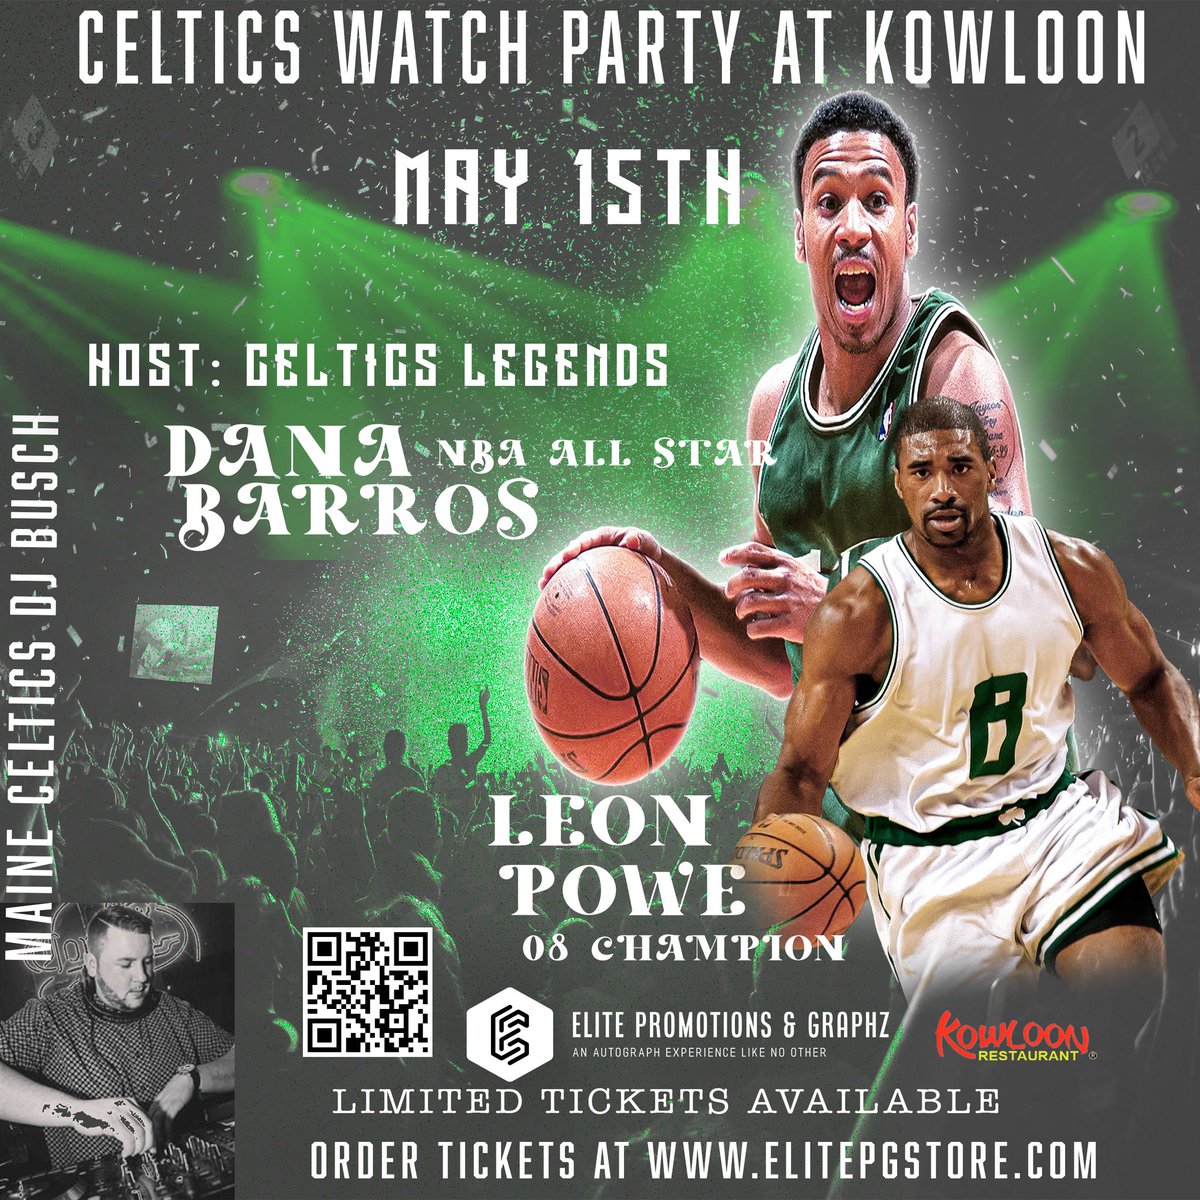 #celtics @KowloonSaugus #celticsplayoff #watchparty #celticswatchparty HOSTS LEGENDS #DANABARROS #LEONPOWE Watch the #BostonCeltics game & enjoy fun filled night with music, food, and drinks. LIMITED TICKETS AVAILABLE / EVENT WILL SELL OUT ORDER TICKETS elitepgstore.com